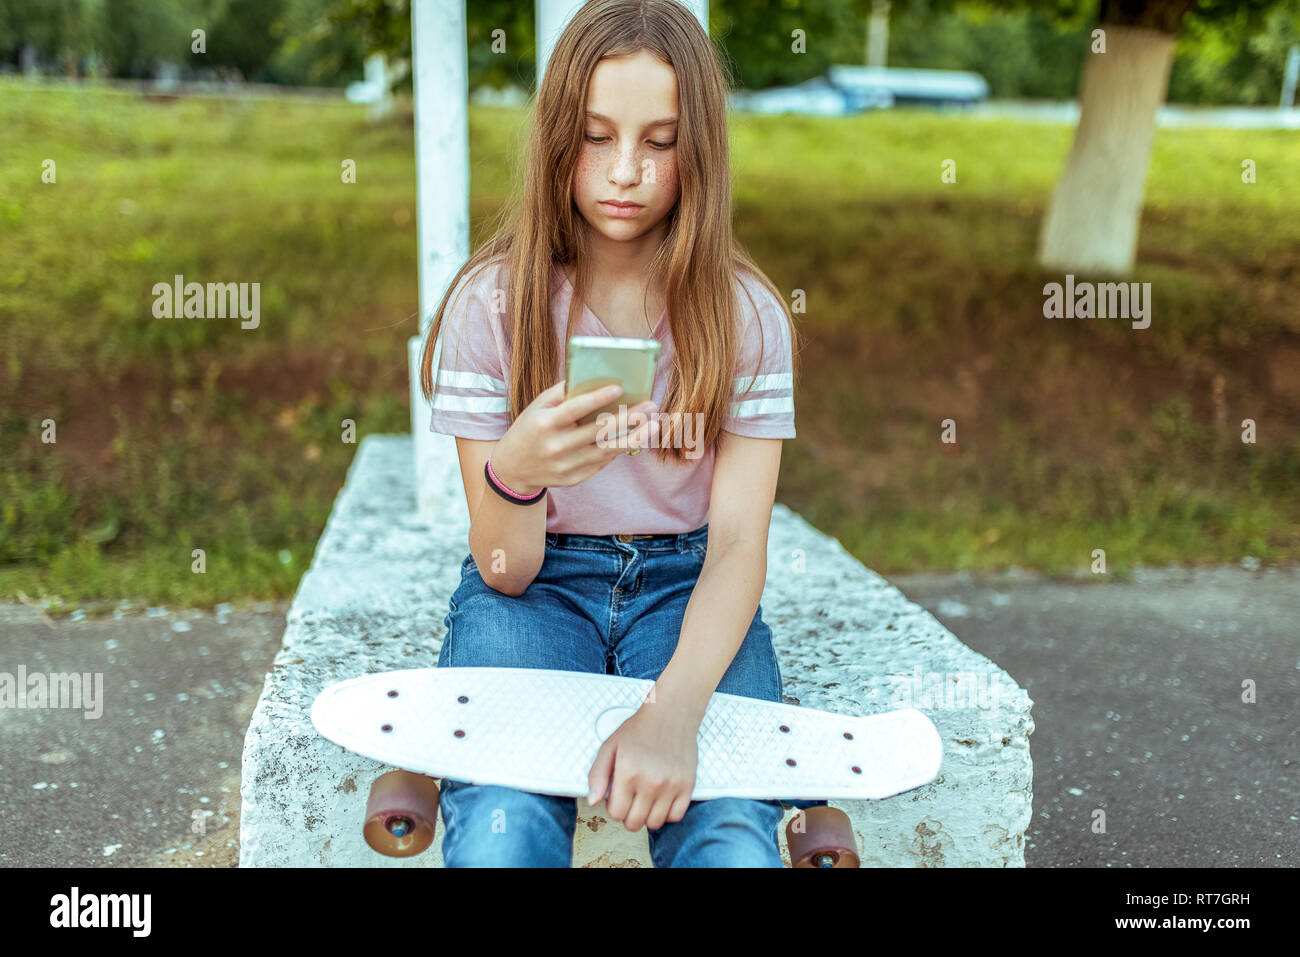 Teen girl 12-13 years old, sitting in hands of a skate. In summer in city in casual jeans and pink T-shirt. Communication in Internet, in hands Stock Photo